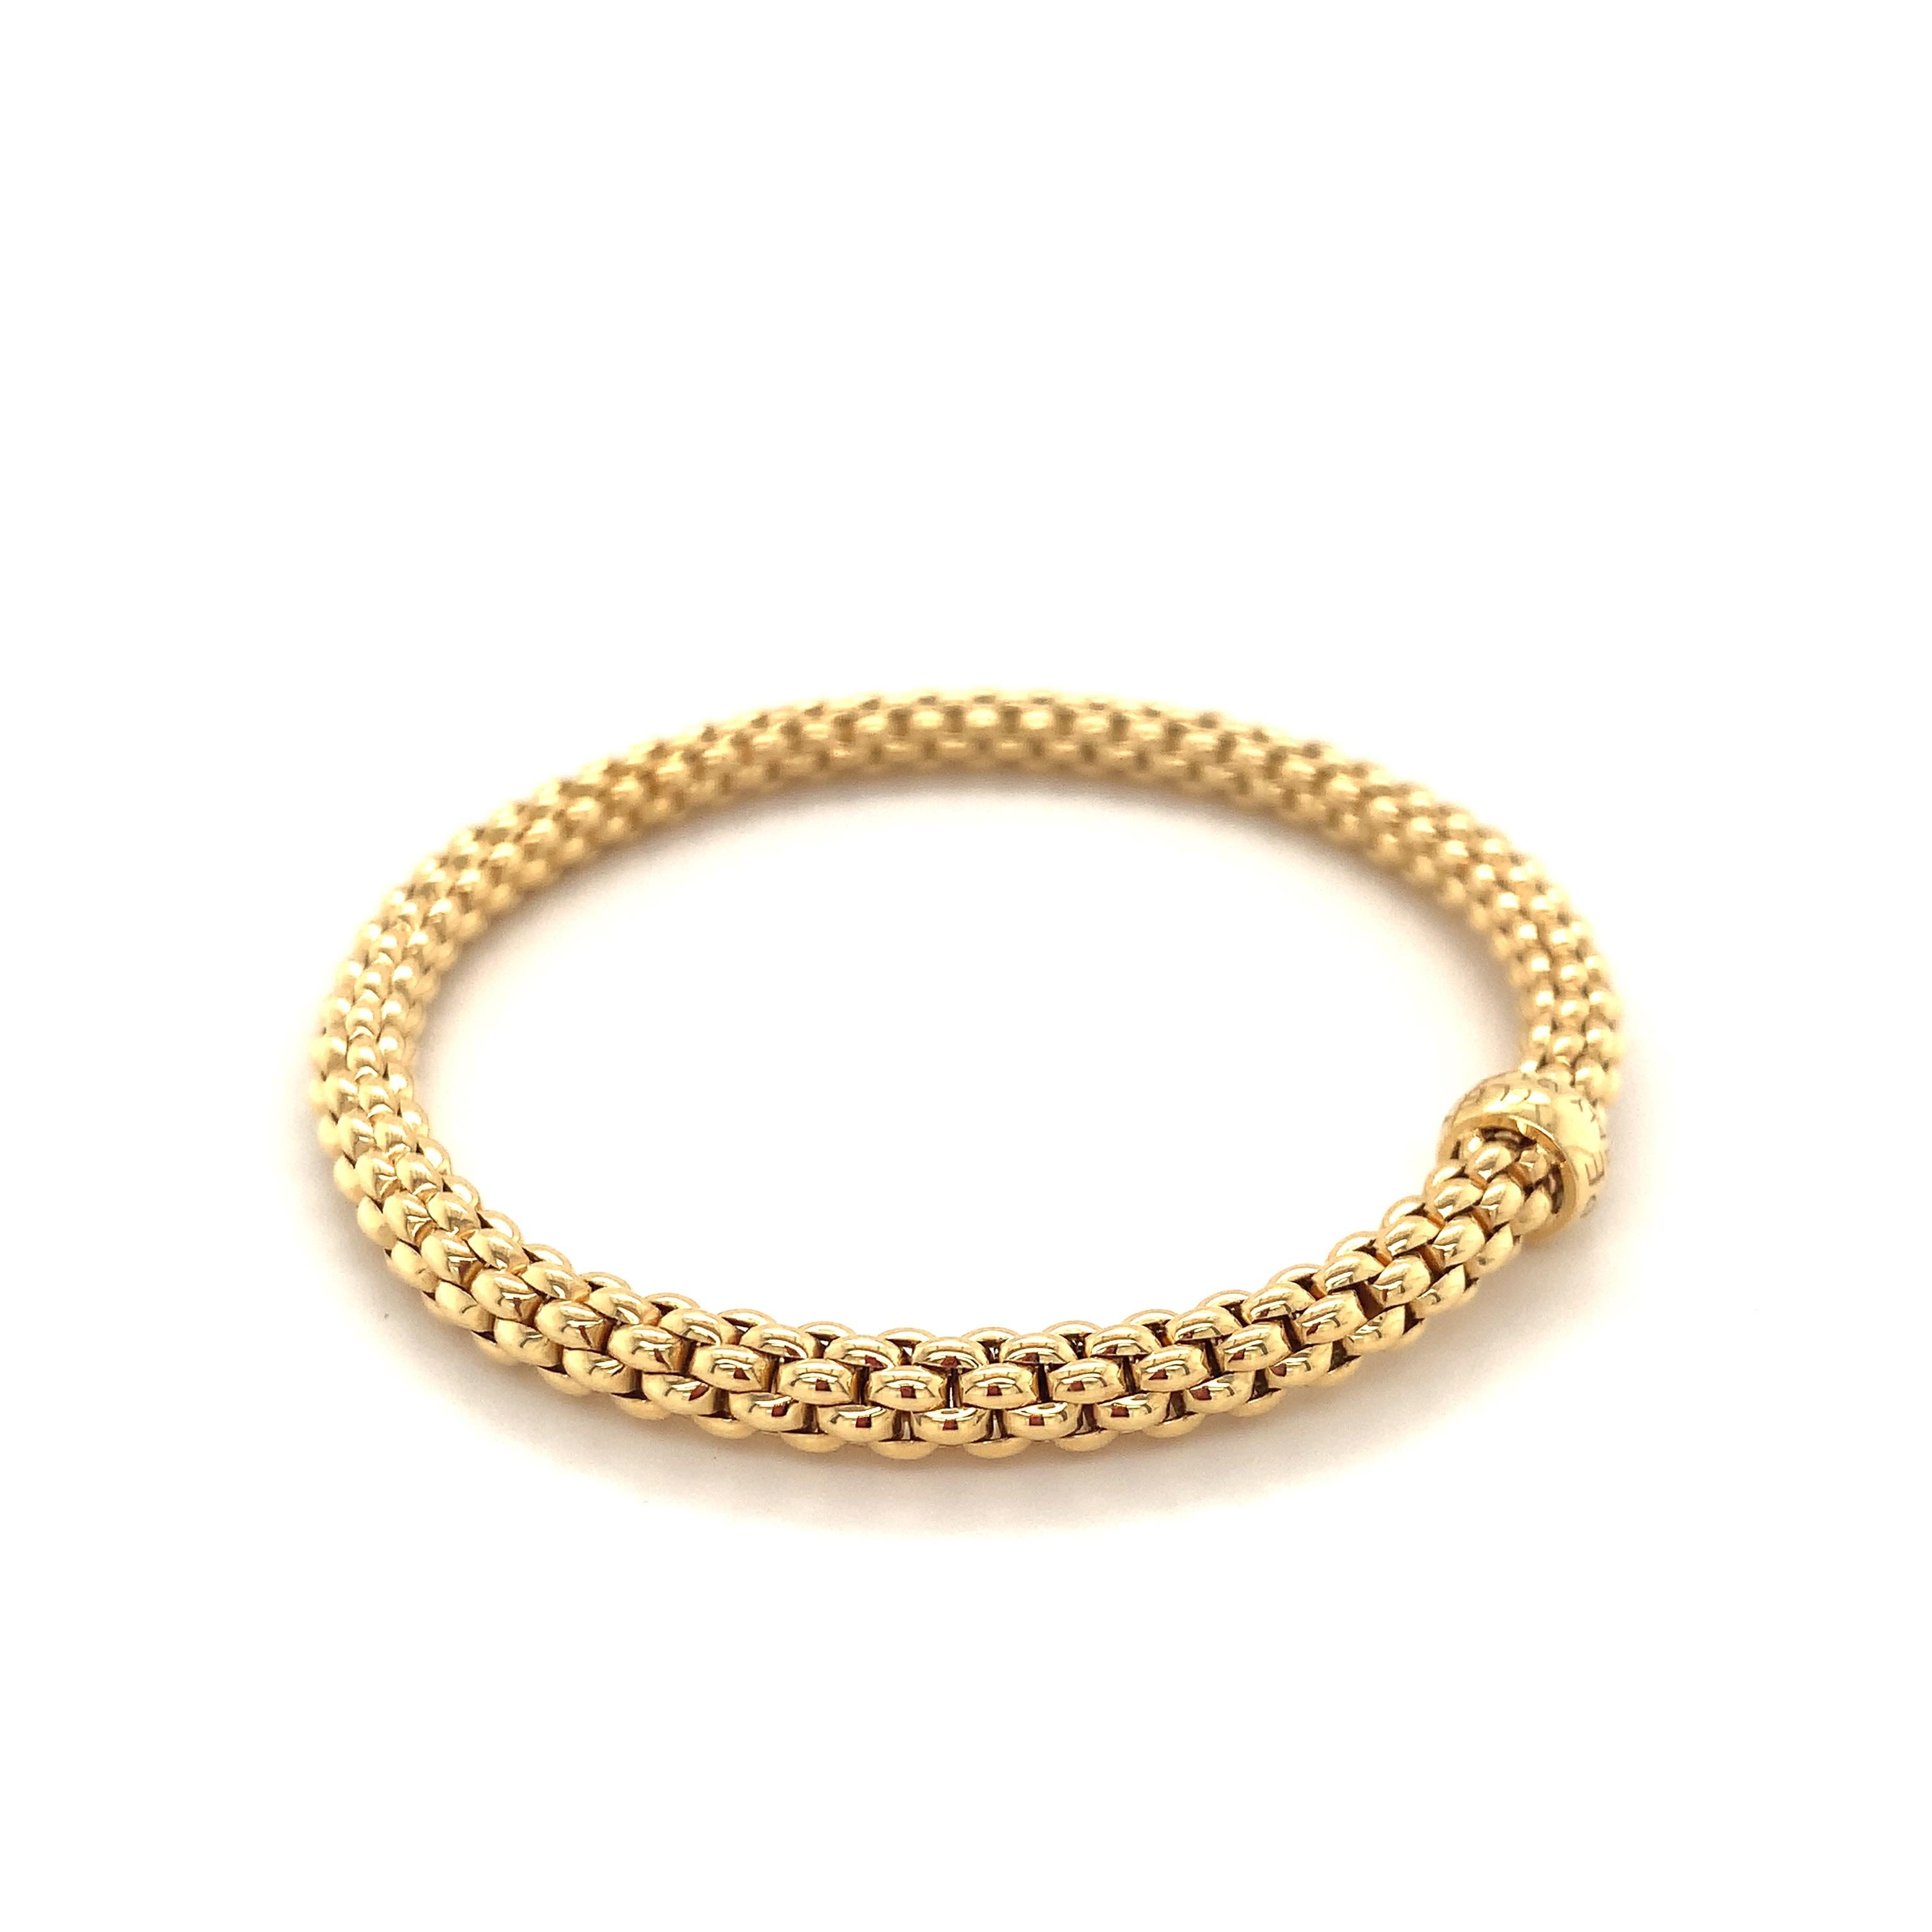 Fope Bracelet 18K Yellow Gold with Solid Gold Rondel 620BM-G 9